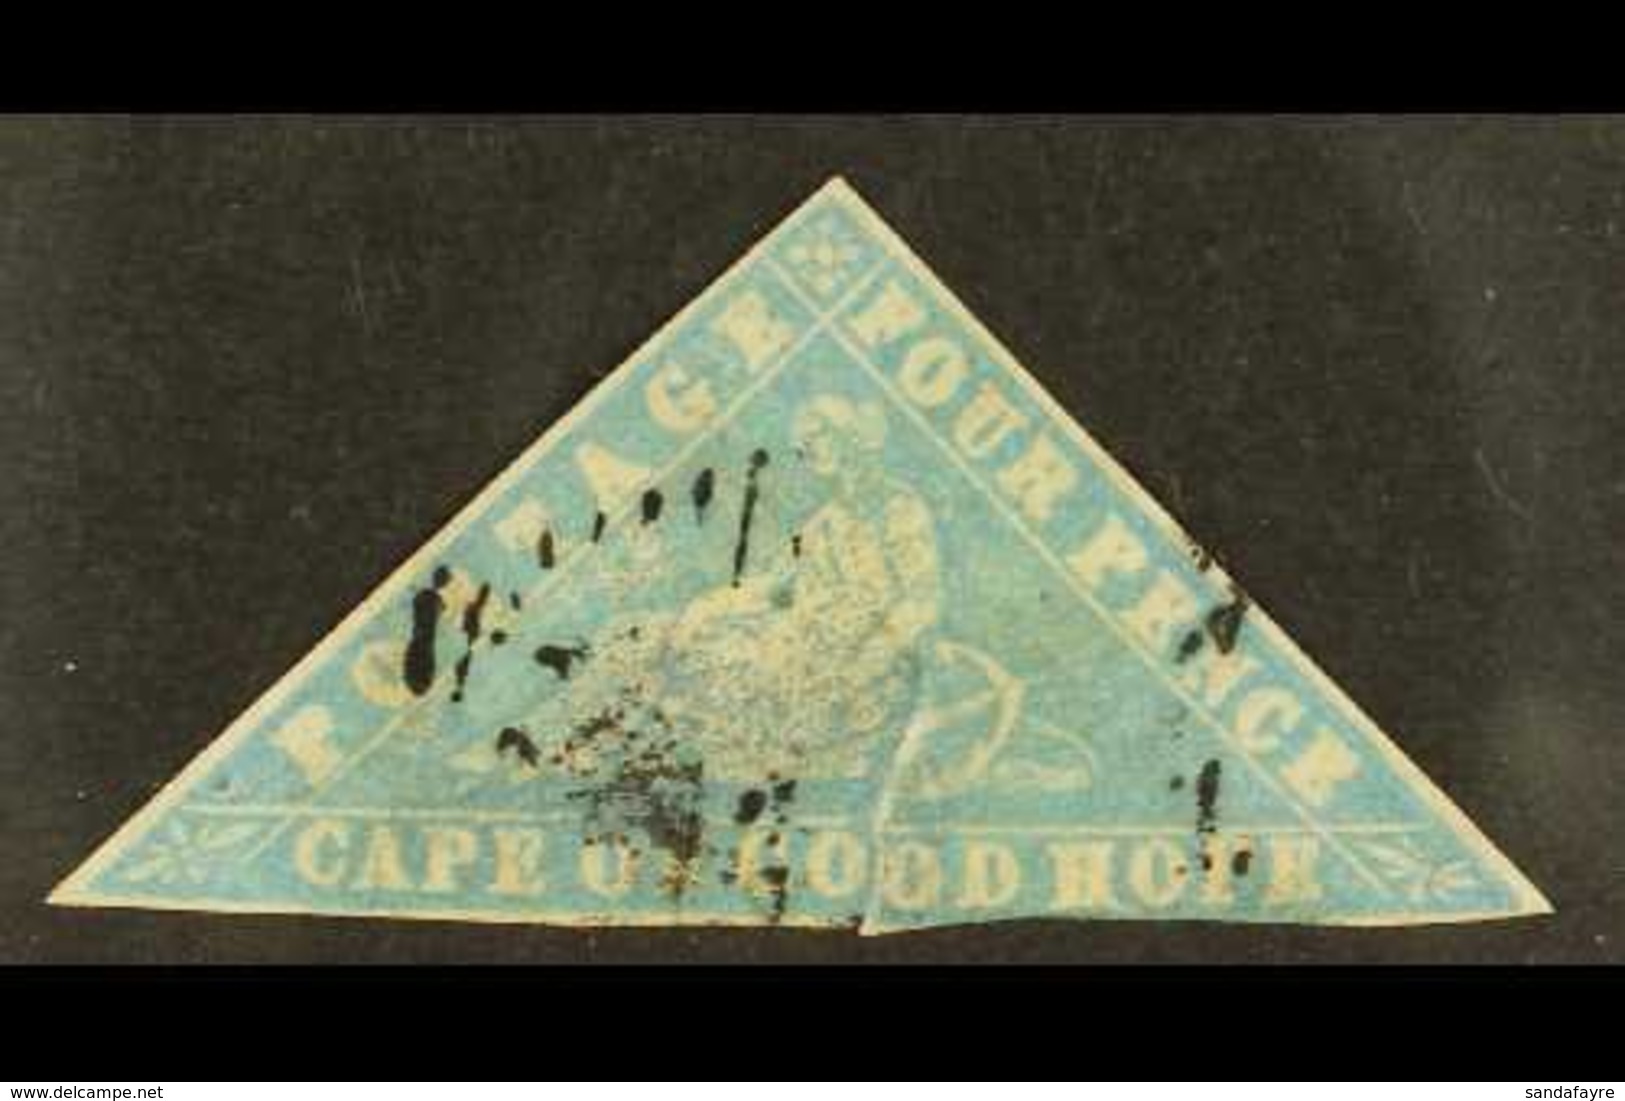 CAPE OF GOOD HOPE  1861 "wood-block" 4d Pale Milky Blue, SG 14, Used, Thinned And A Repaired Tear. Cat £2,000. For More  - Zonder Classificatie